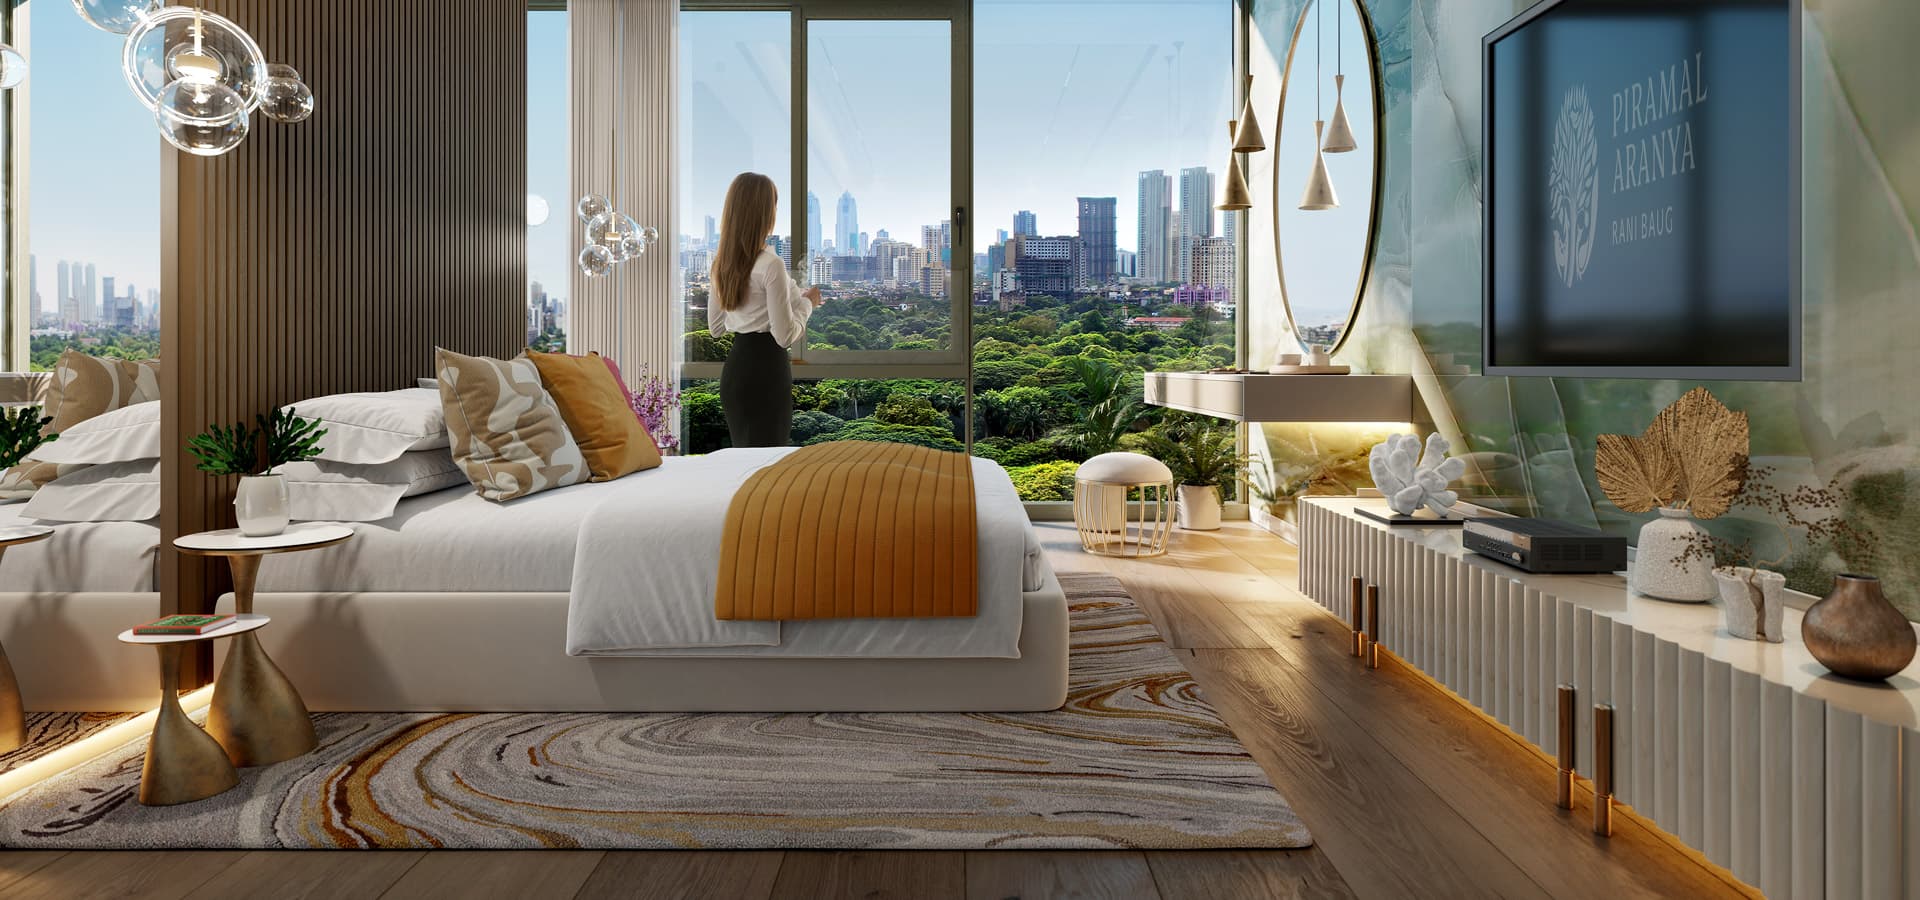 Piramal Realty's interior showcases a bedroom with a captivating view overlooking Rani Baug, defining luxury apartments in Byculla.